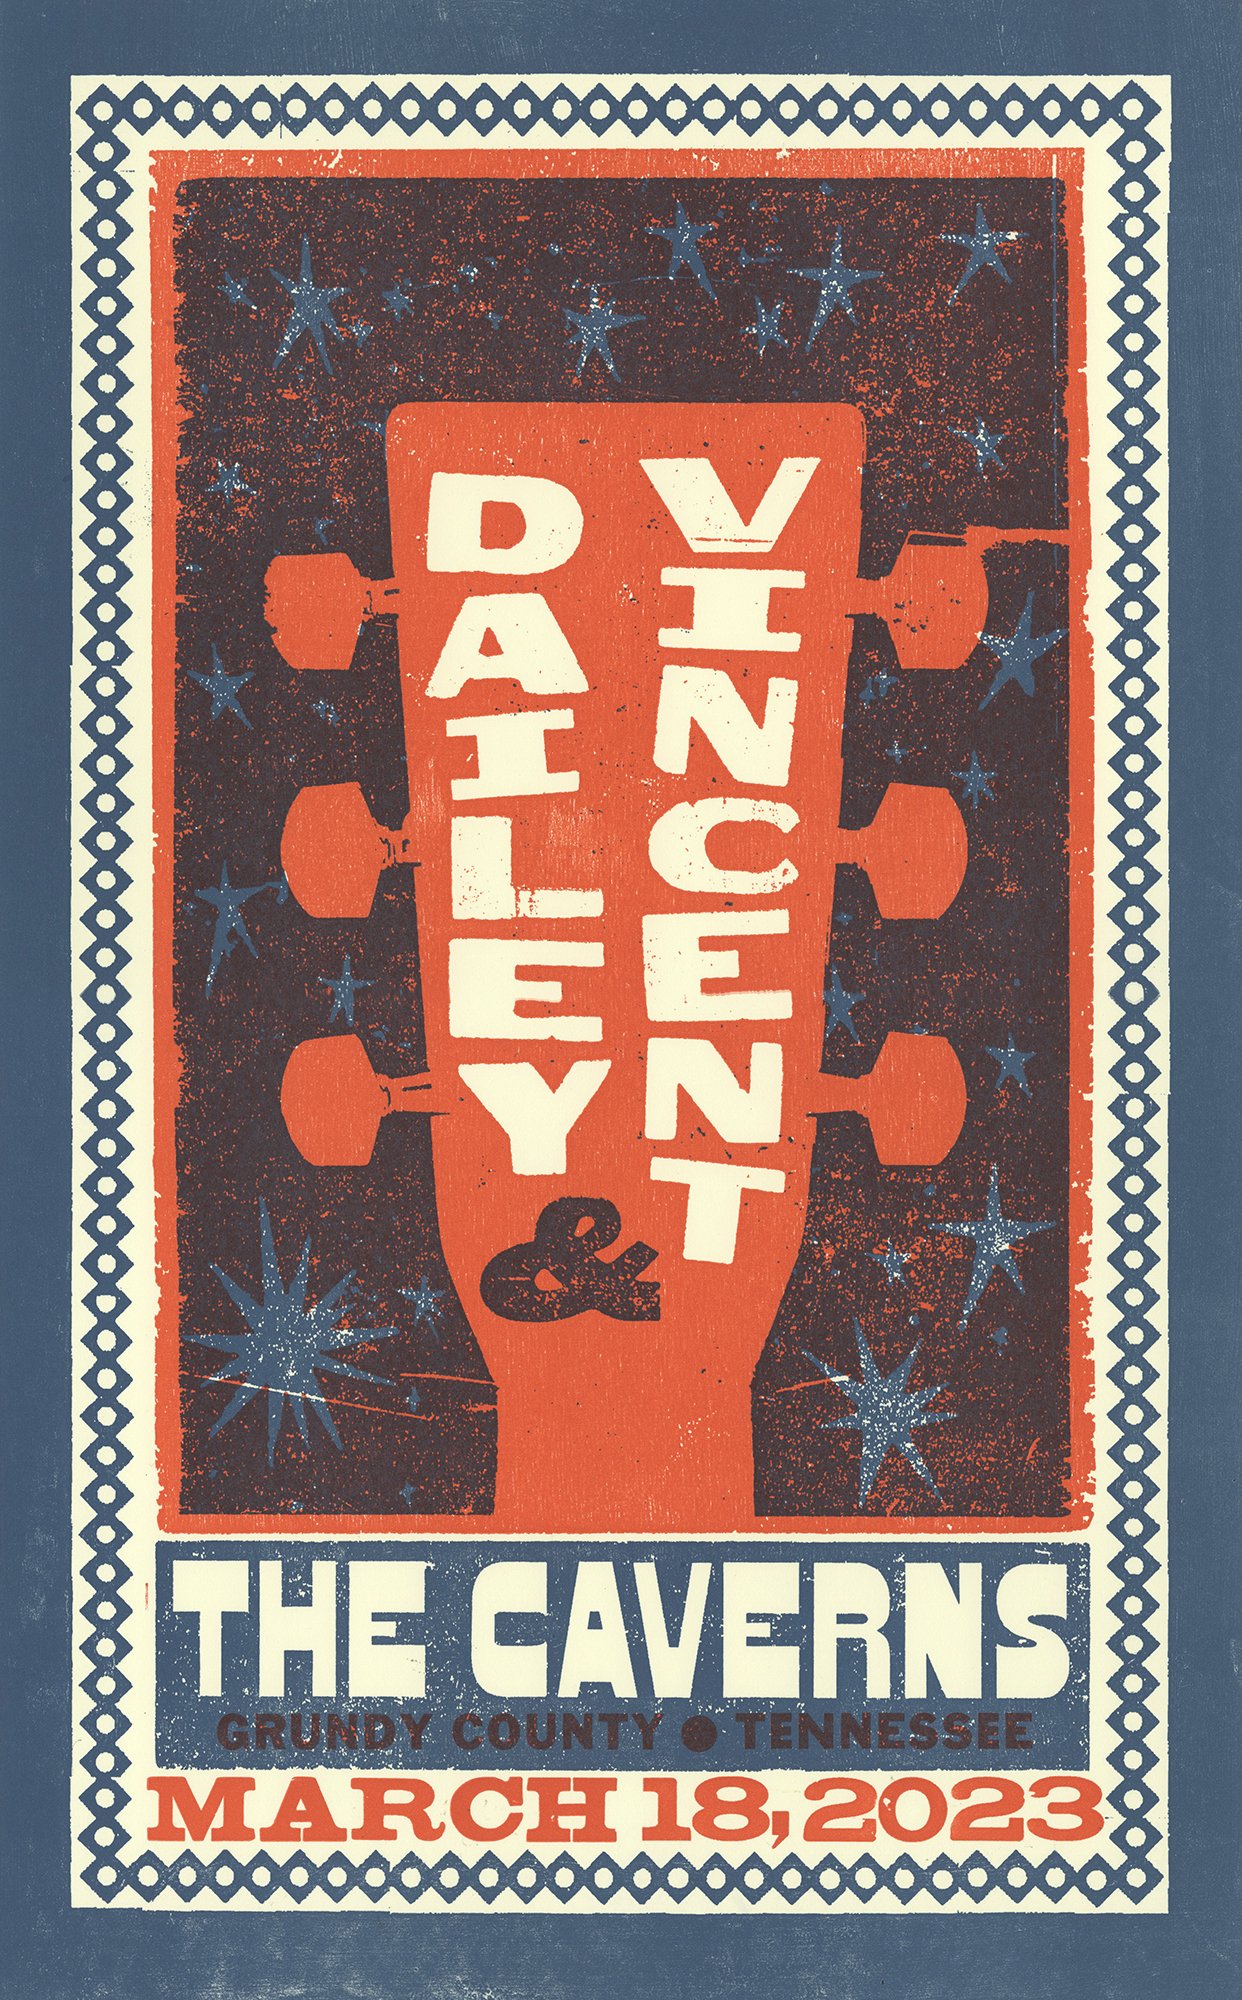 dailey&vincent(small).jpg